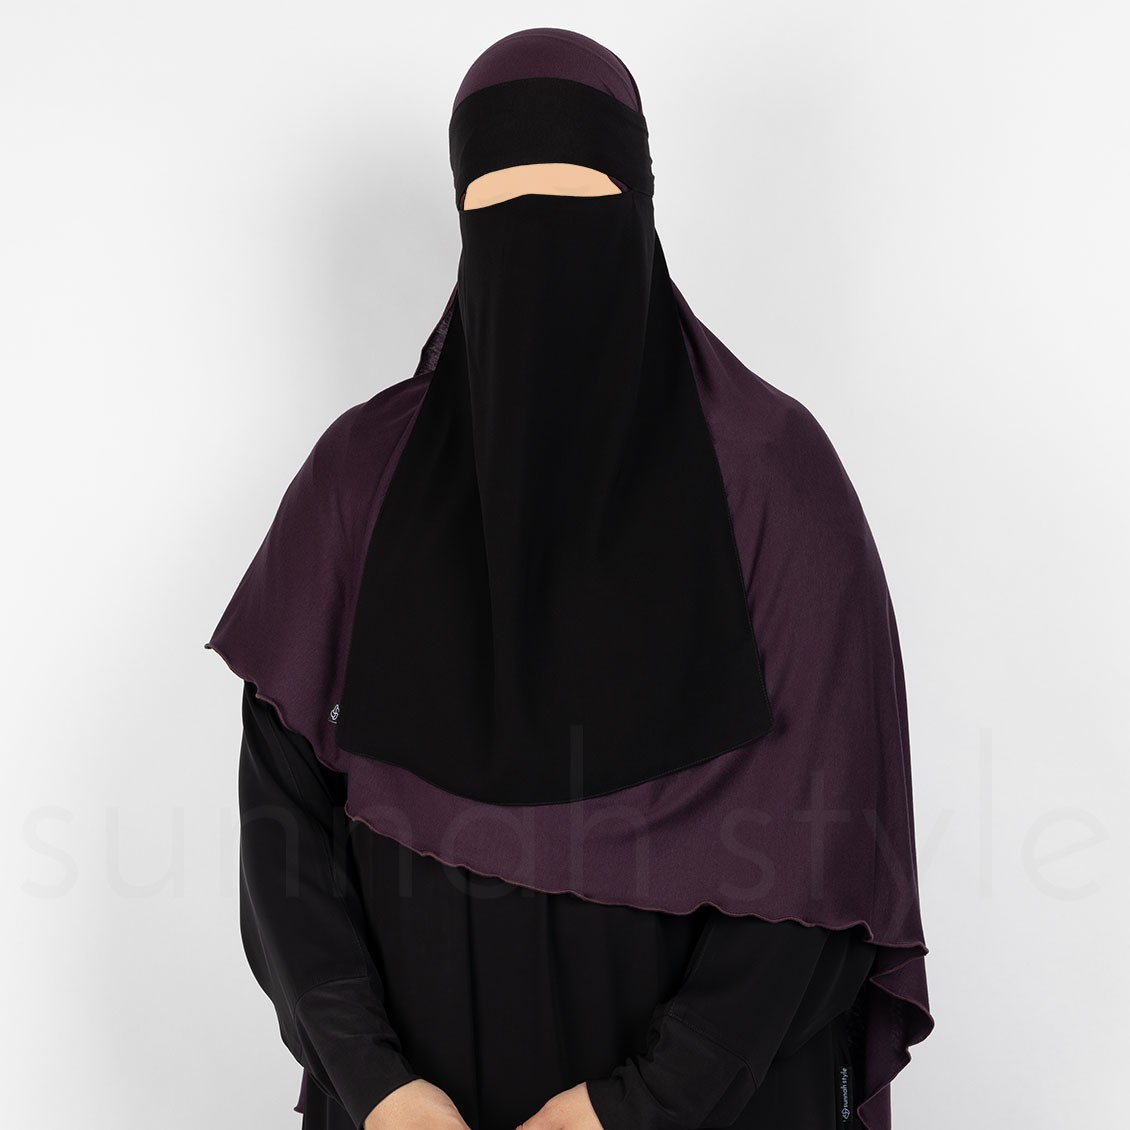 Sunnah Style Soft Fit One Layer Niqab Black